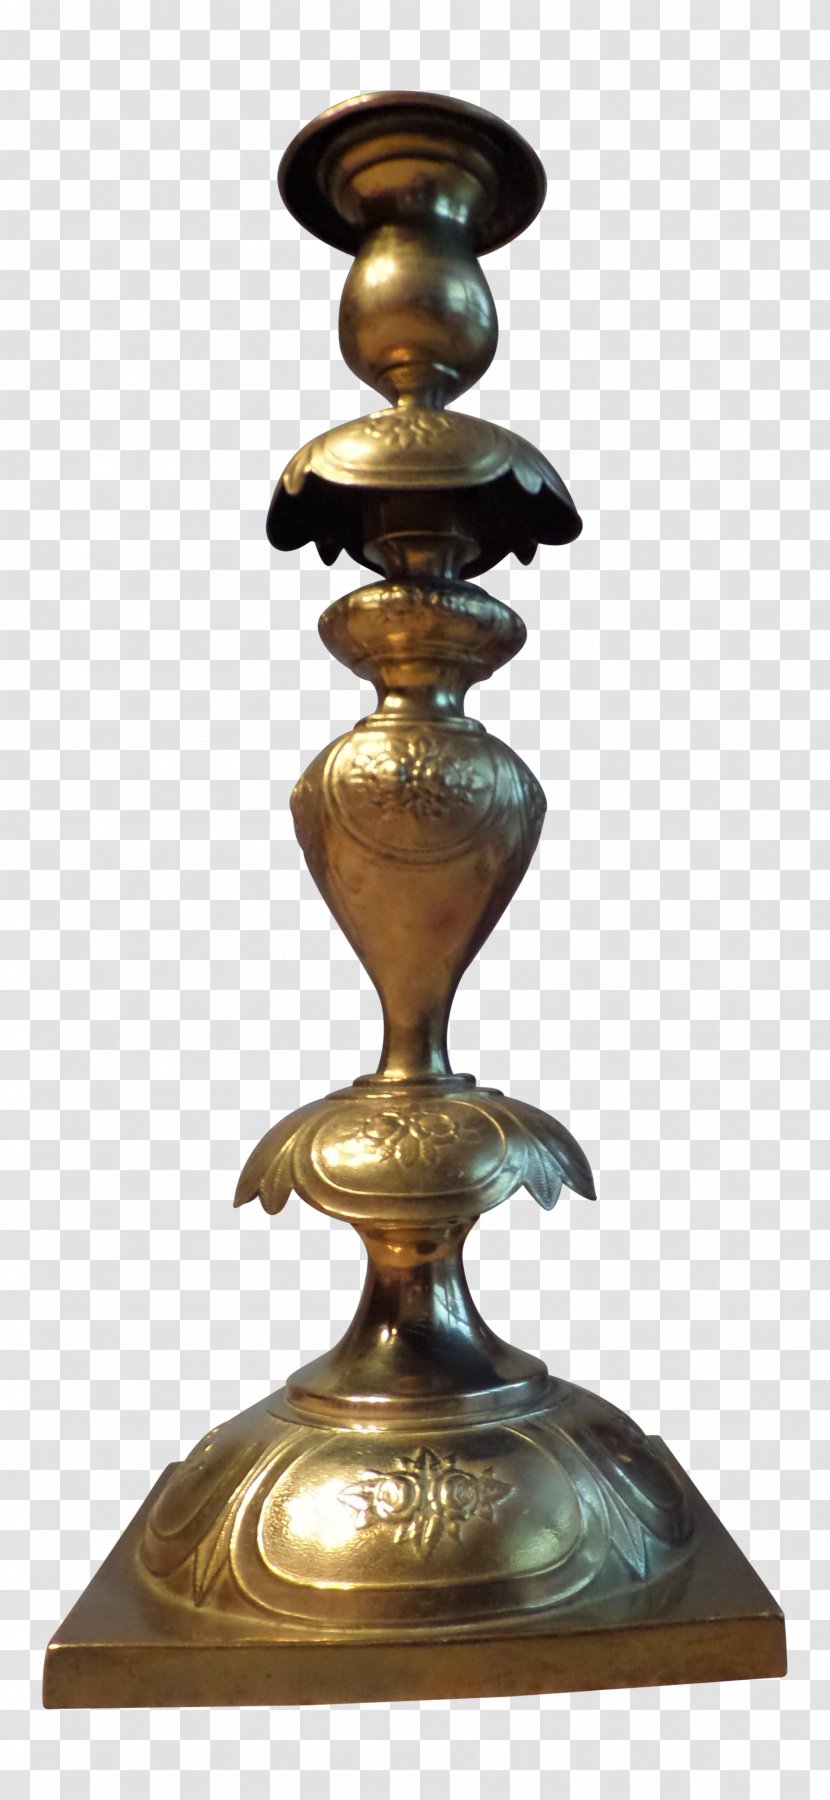 Chairish Antique Brass Candlestick Vintage Clothing - Wire - Baluster Transparent PNG